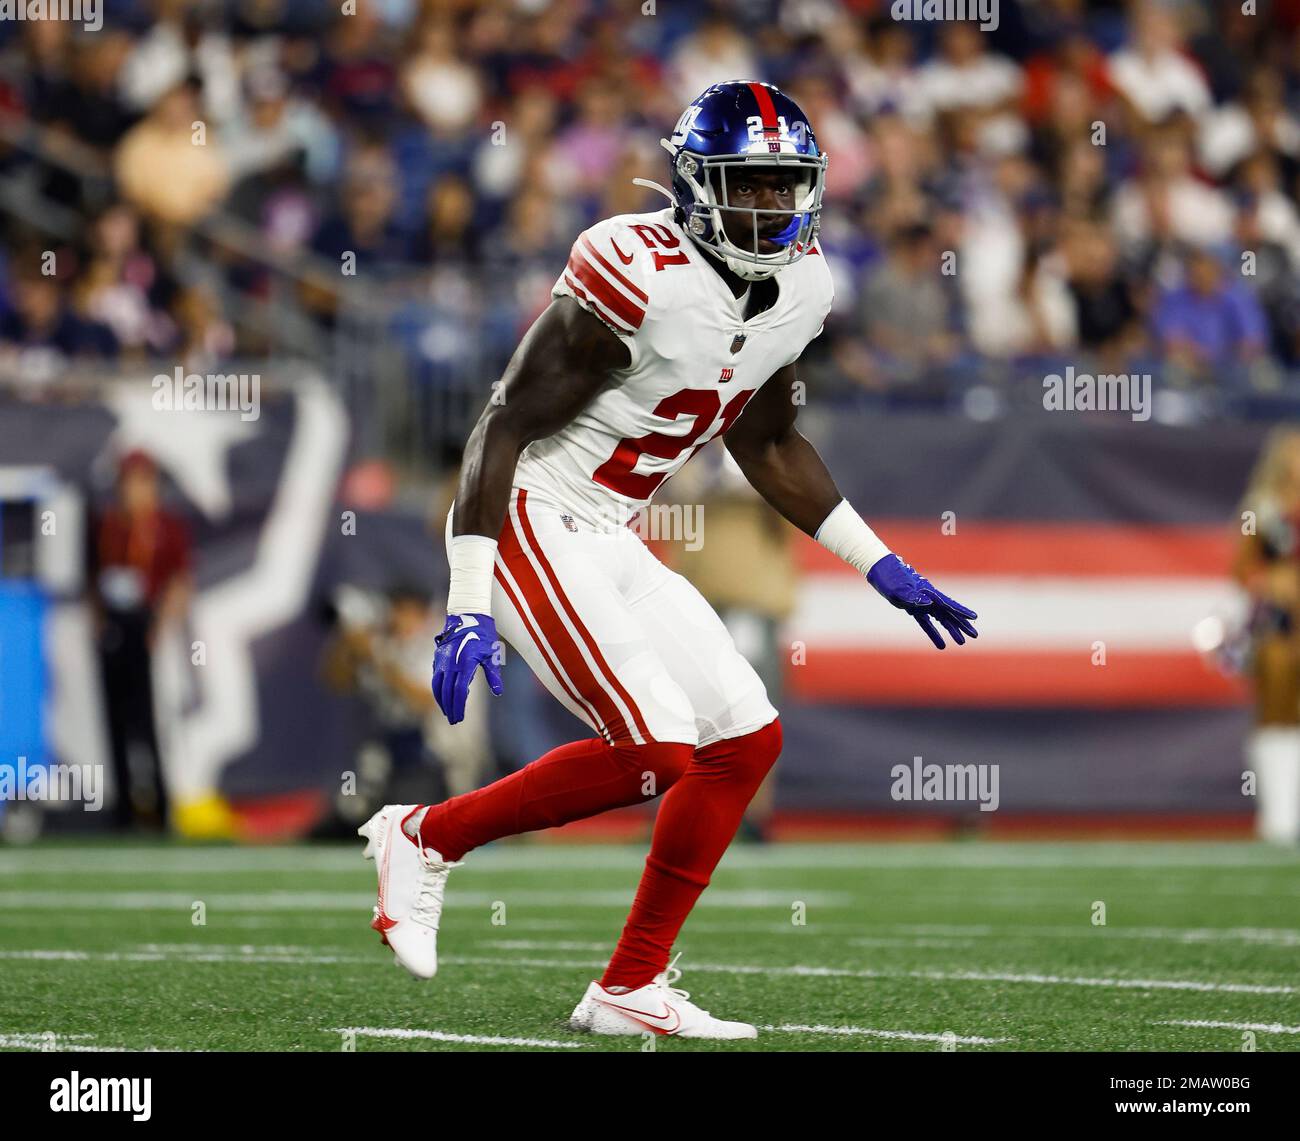 New York Giants safety Yusuf Corker during an NFL preseason